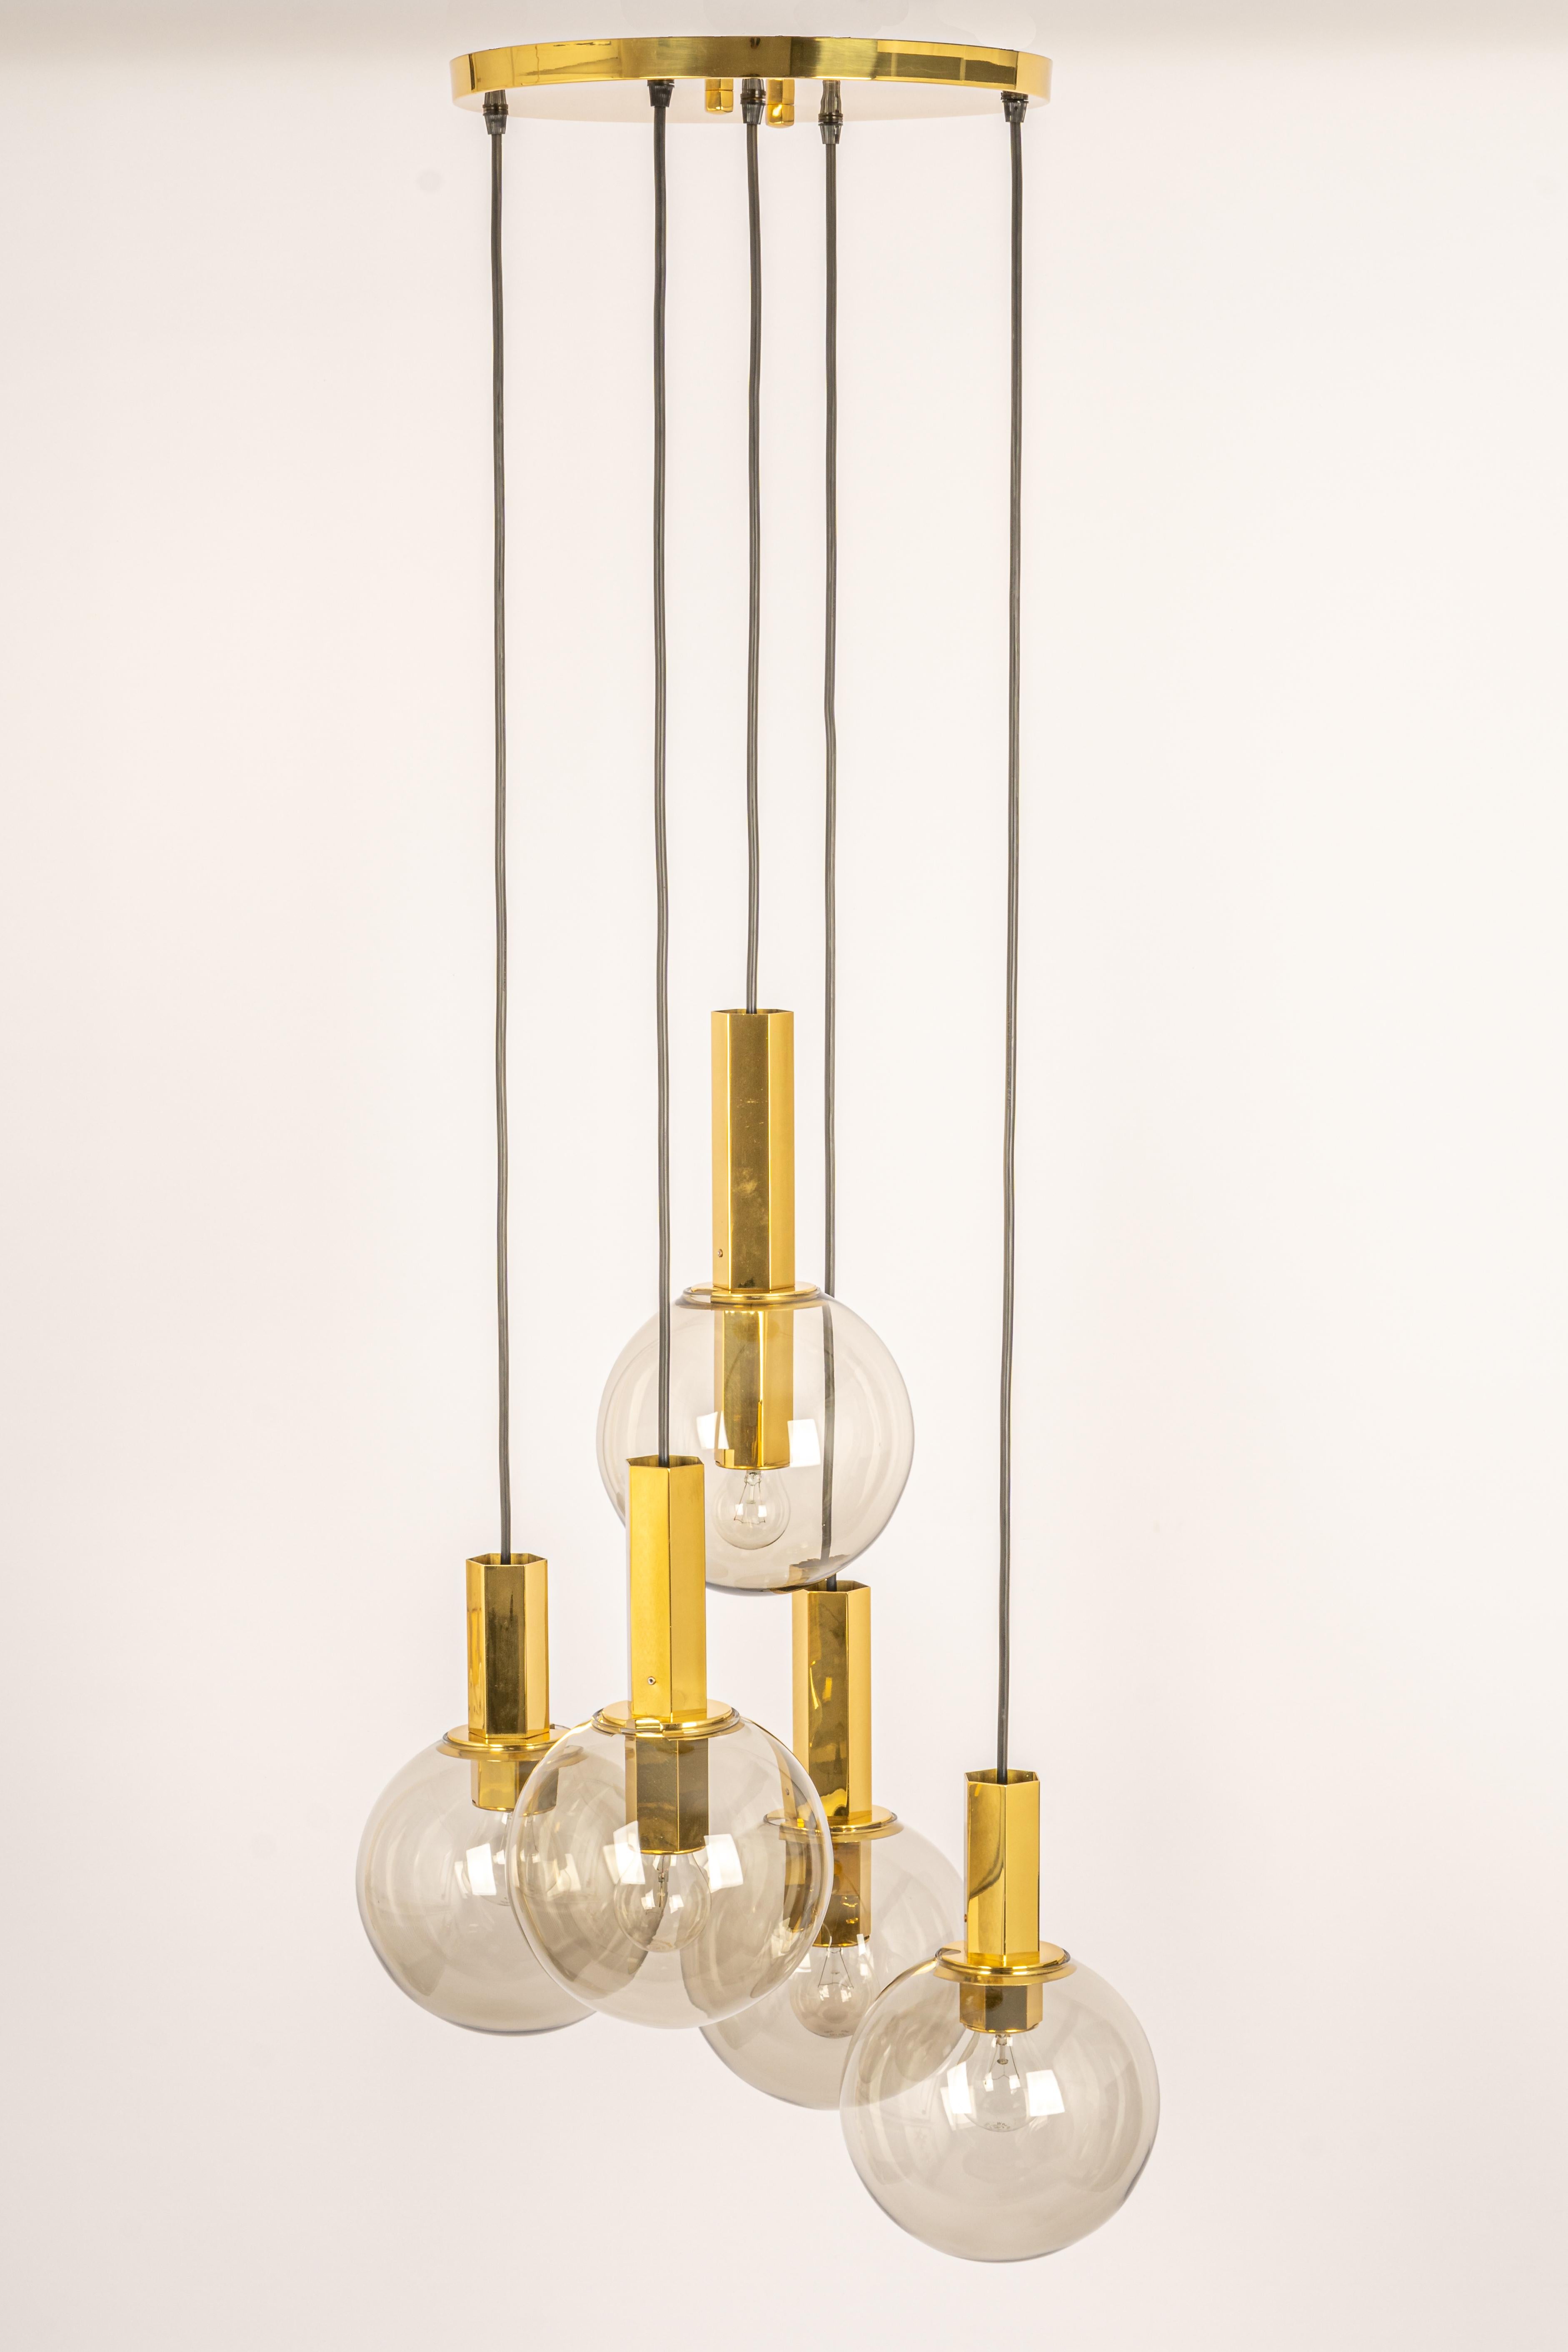 A special large cascading chandelier by Cosack, manufactured in Germany, circa the 1970s with 5 smoked glasses.
Wonderful form and stunning light effect.
Sockets: 5 x E27 standard bulb. (60 W max) 
Light bulbs are not included. It is possible to